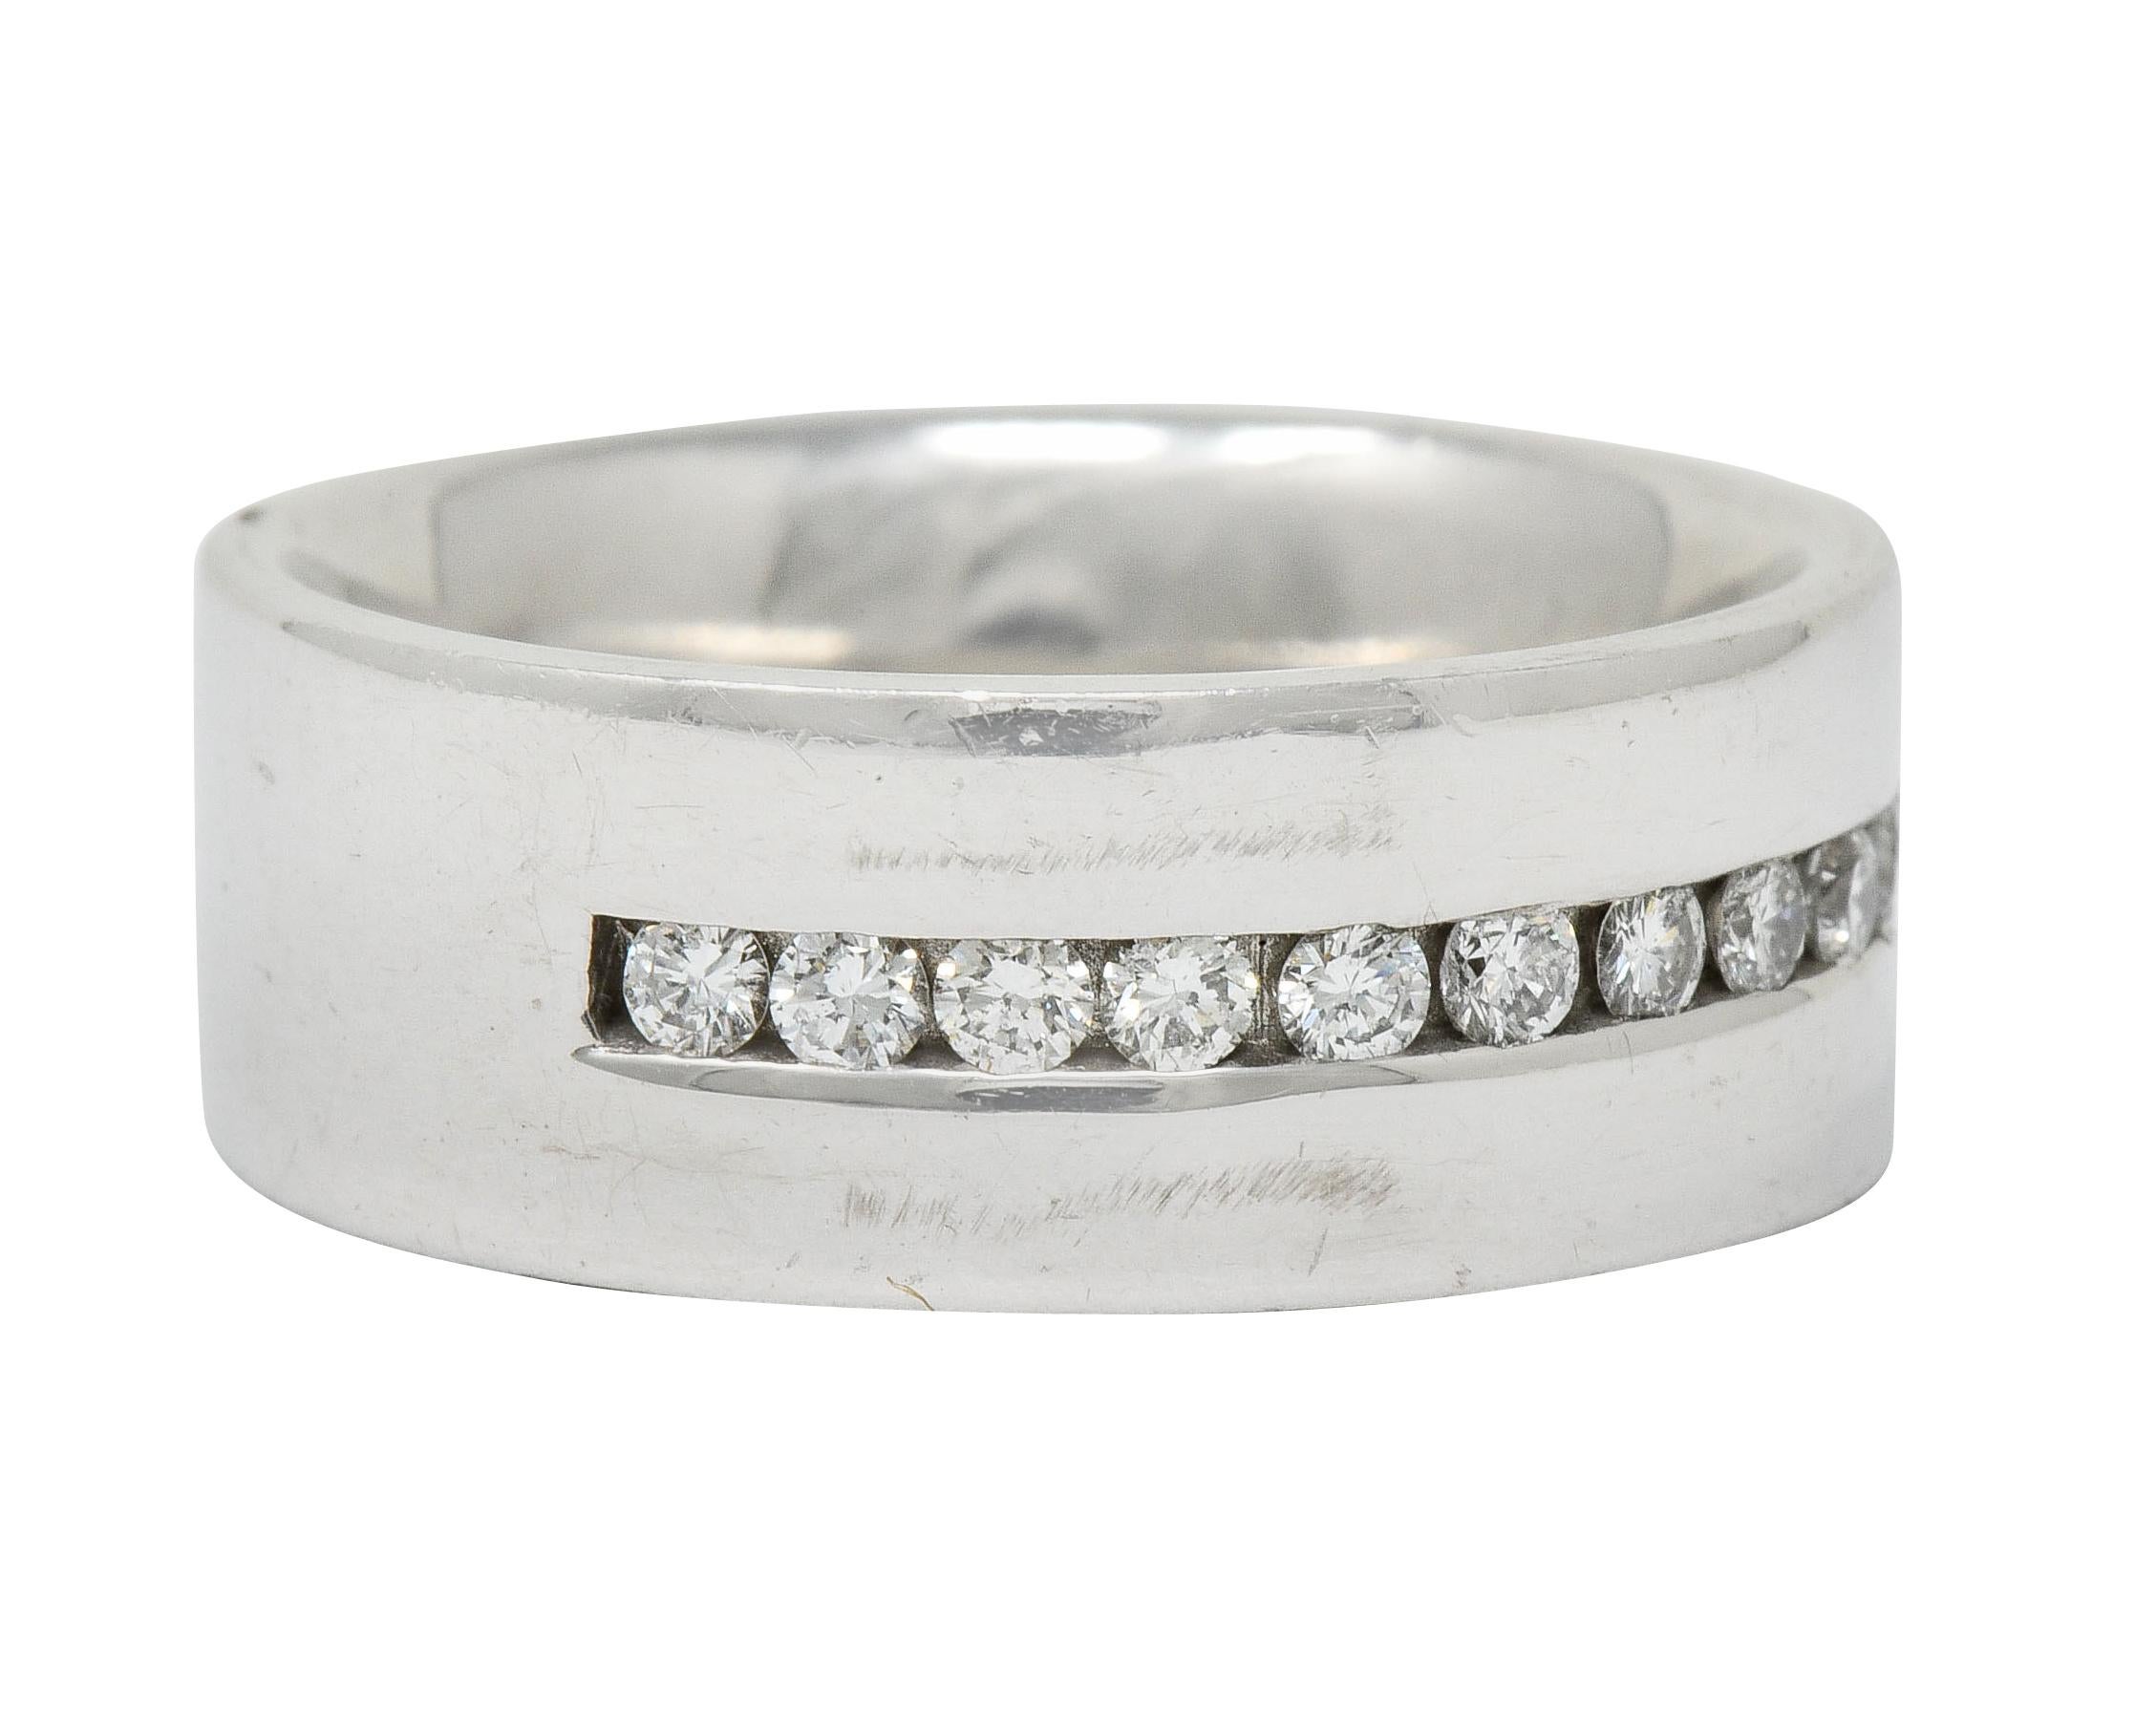 Wide band ring centering a channel of round brilliant cut diamonds

Weighing approximately 0.52 carat with G/H color and SI clarity

Channel is flanked by high polished white gold edges

Completed by a comfort fit grip

With maker's mark and stamped